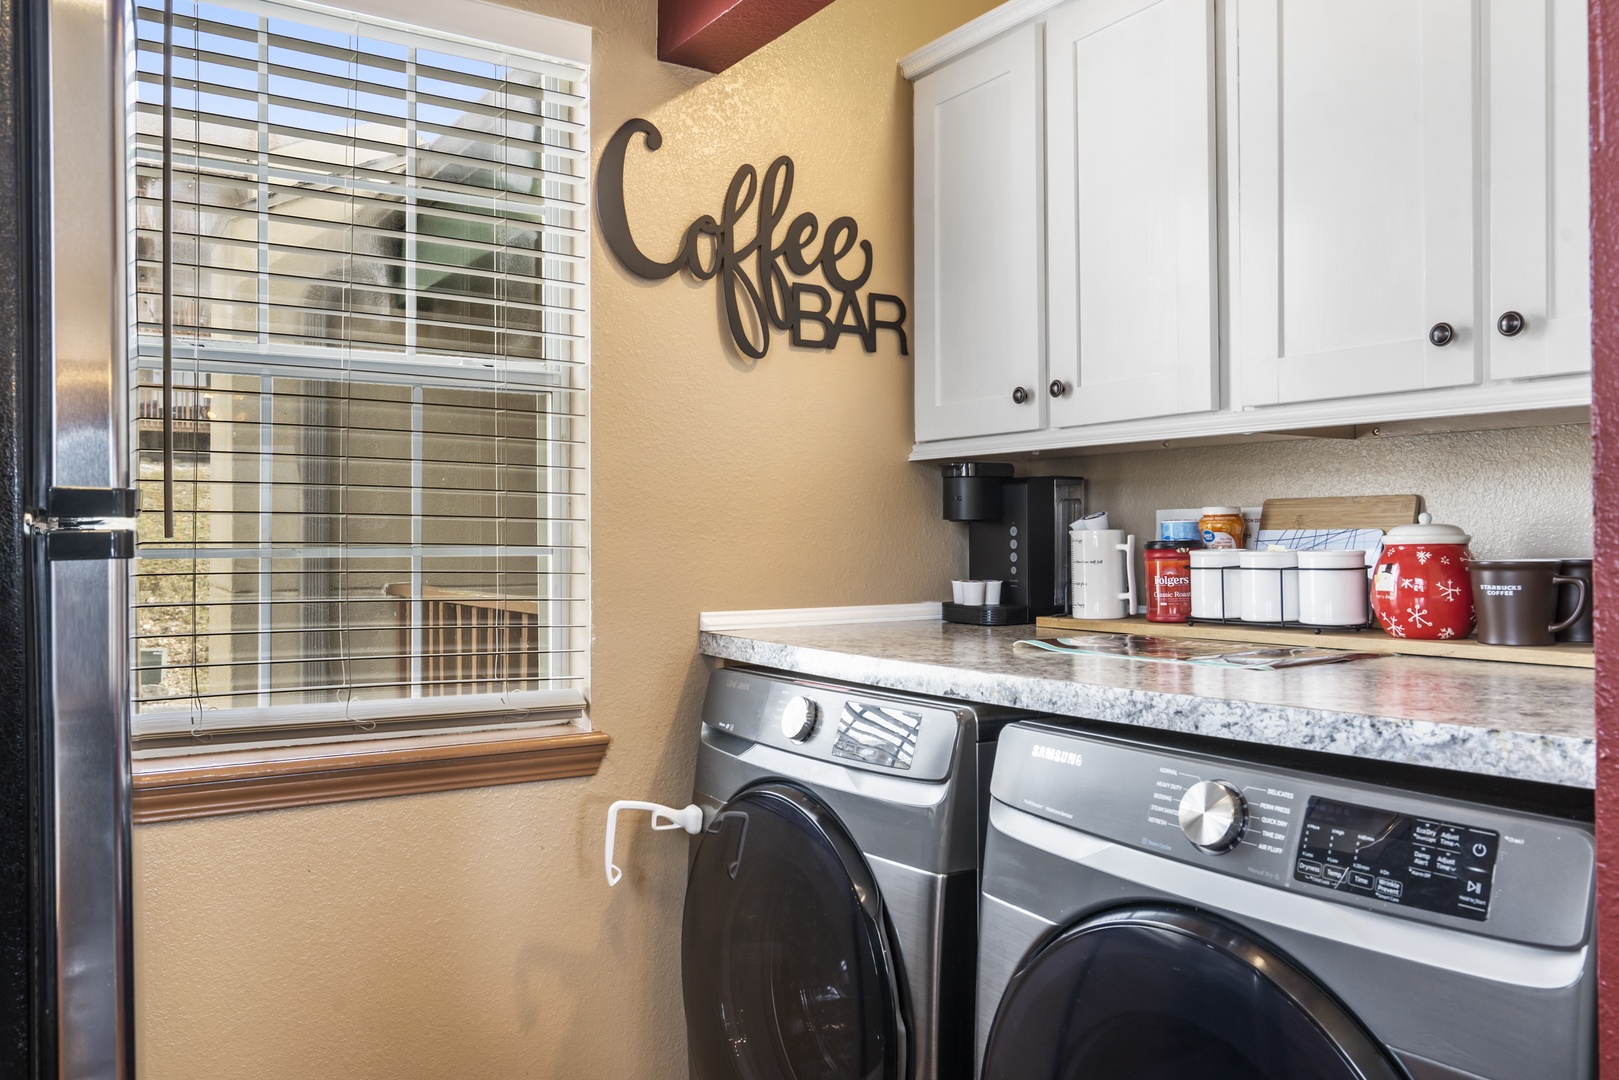 Private laundry is available for your stay, tucked away in the kitchen